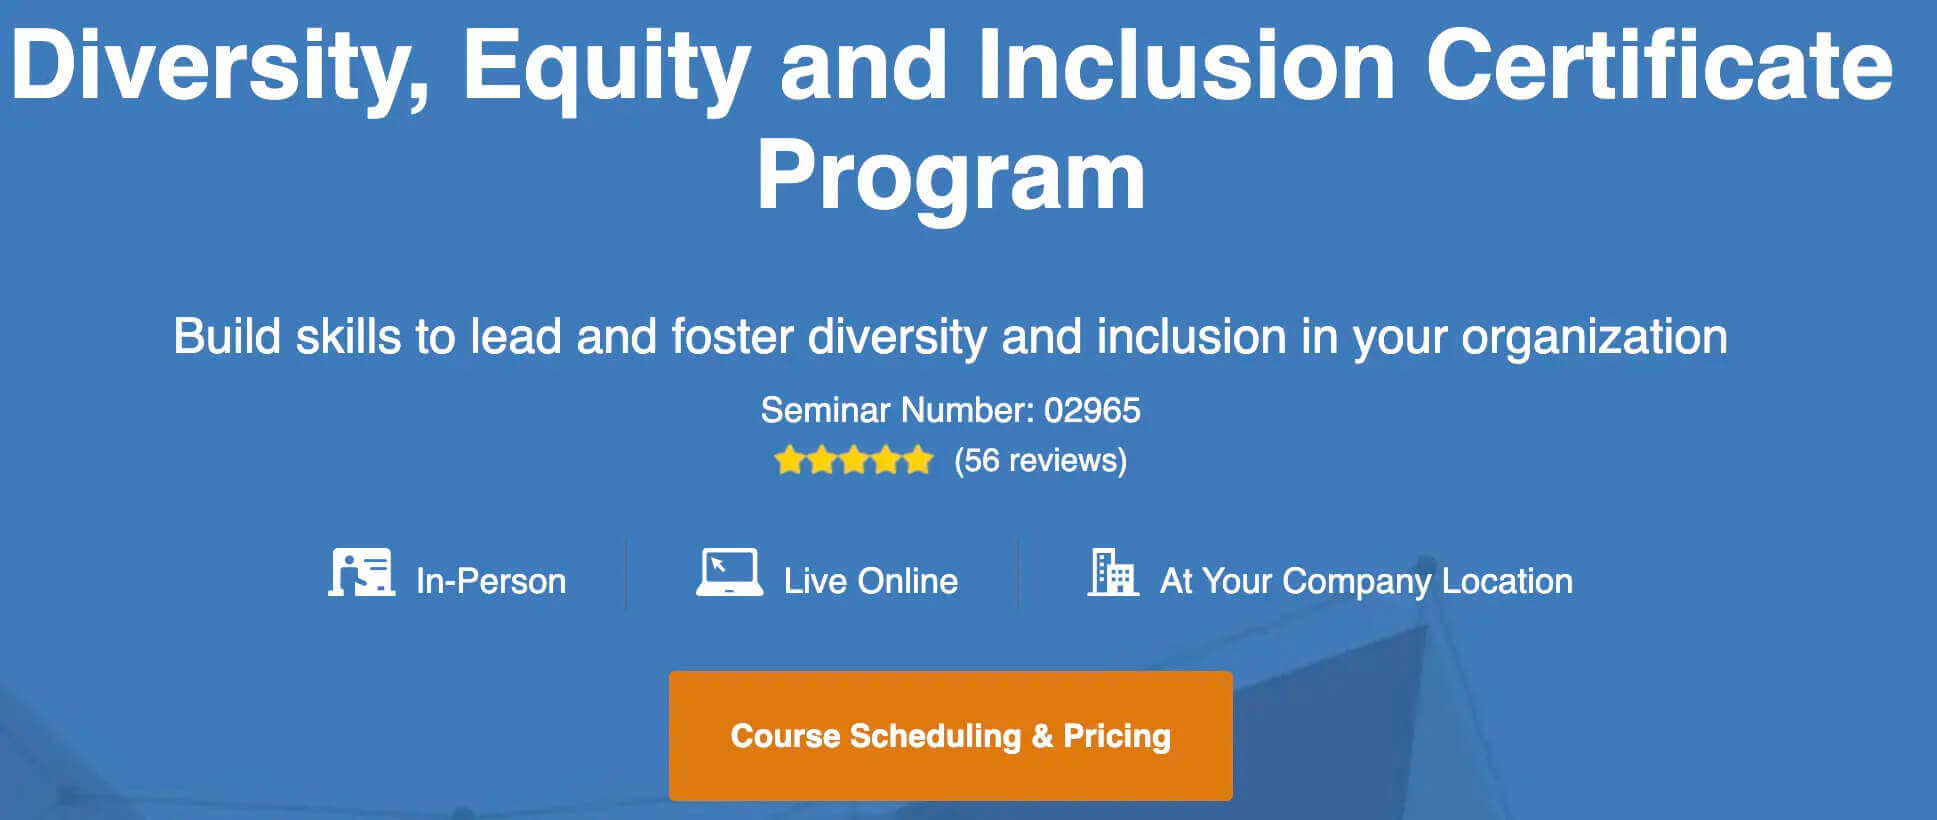 The diversity, equity and inclusion certificate program, as another example of DEI training.